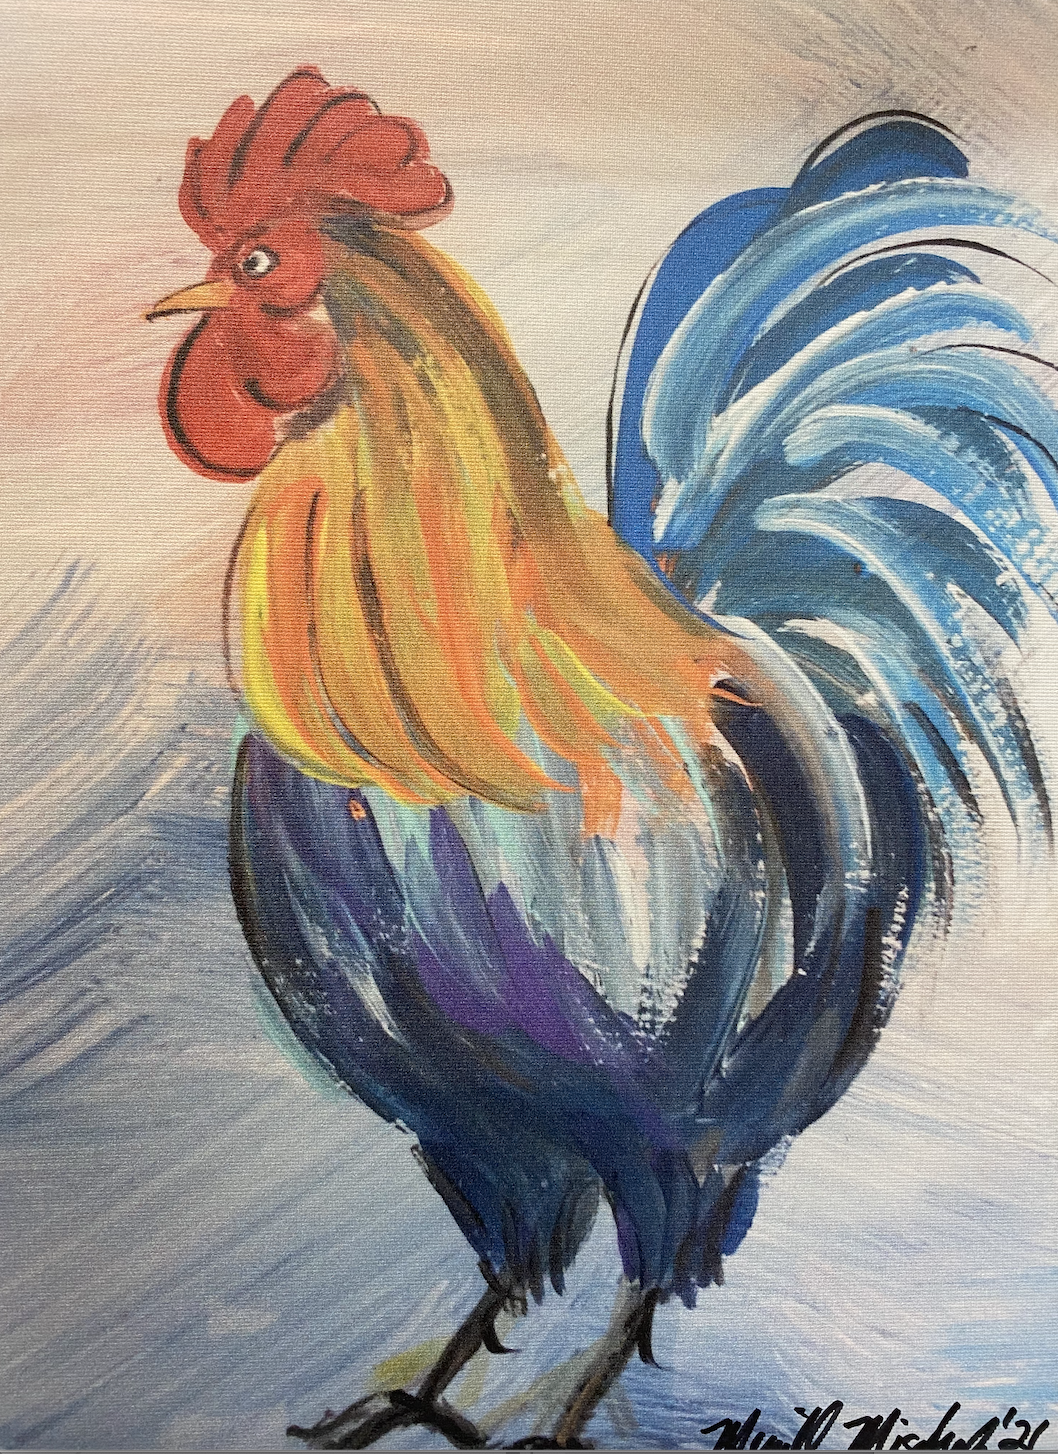 Rooster 11” x 14” canvas print